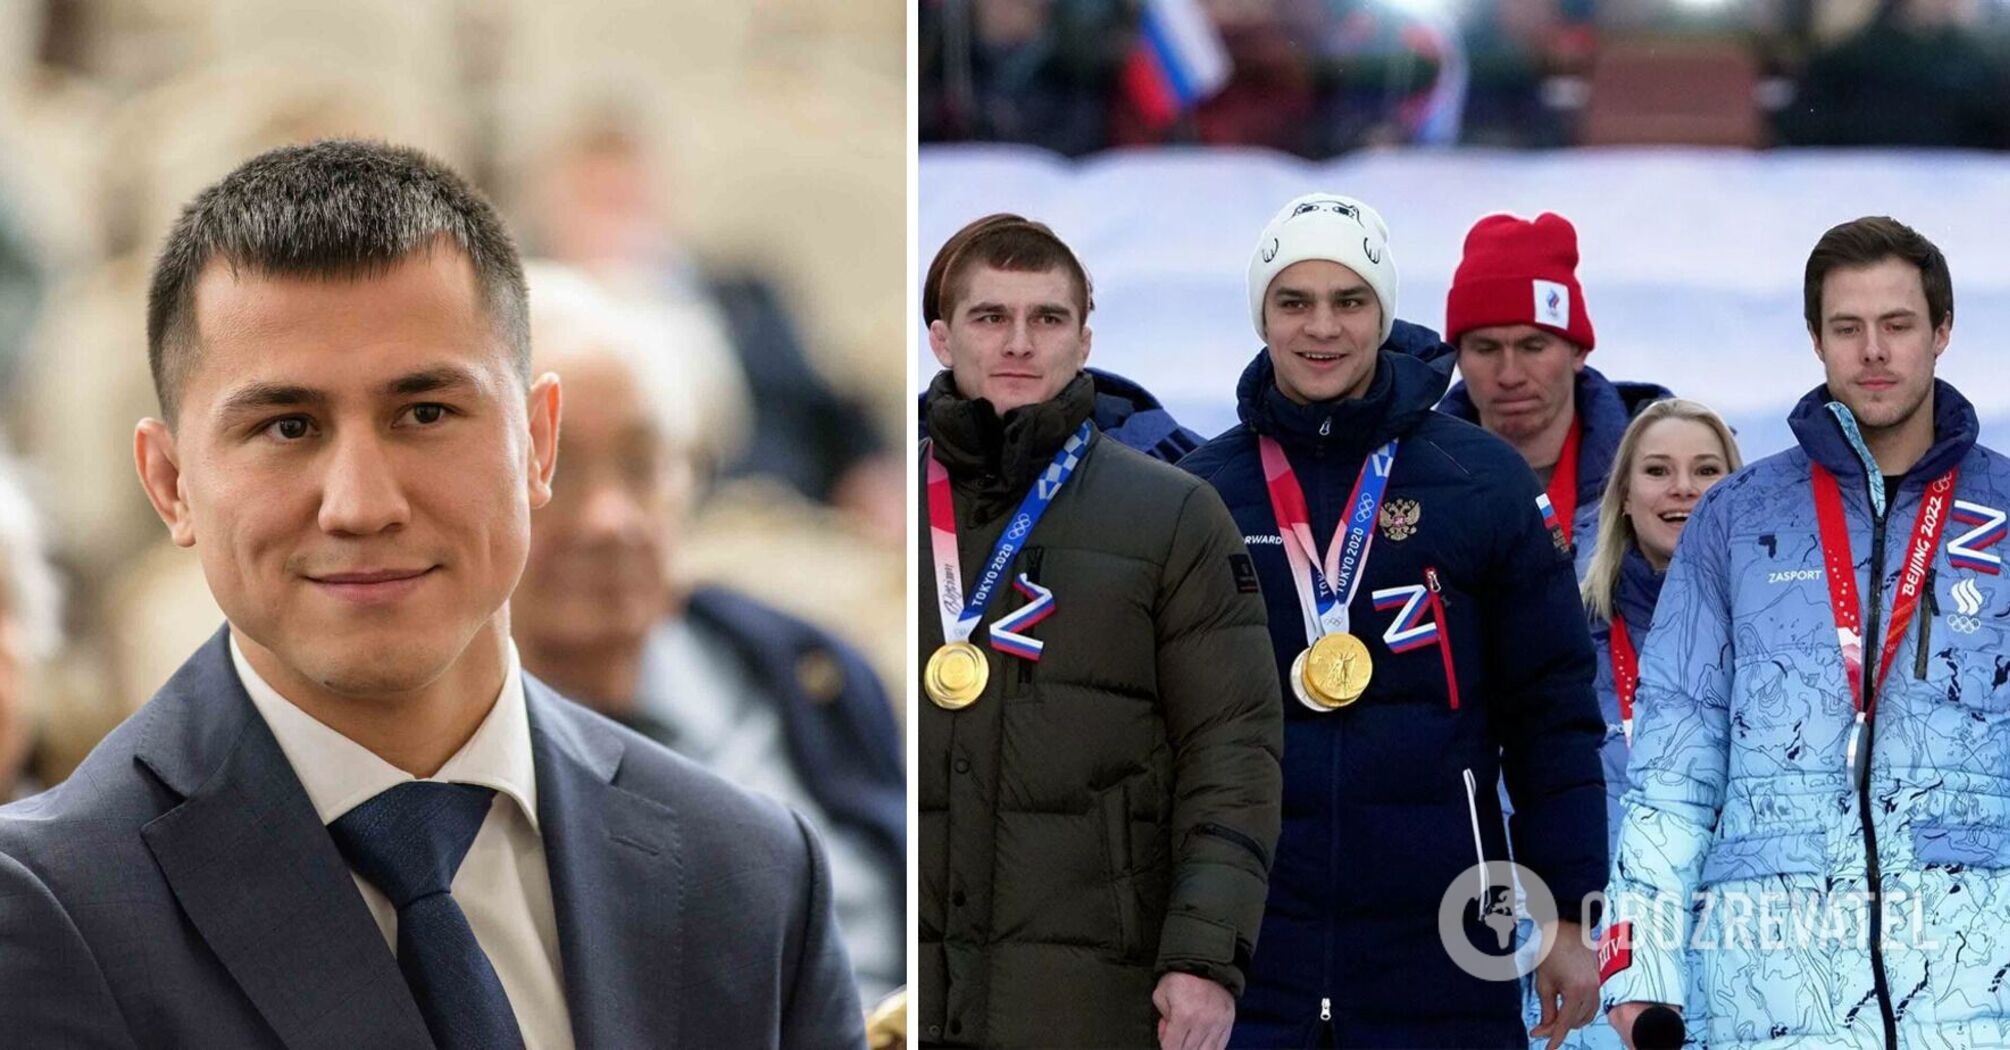 'It has taken obvious forms': Russian Olympic champion complains that Russians are not loved or even tolerated